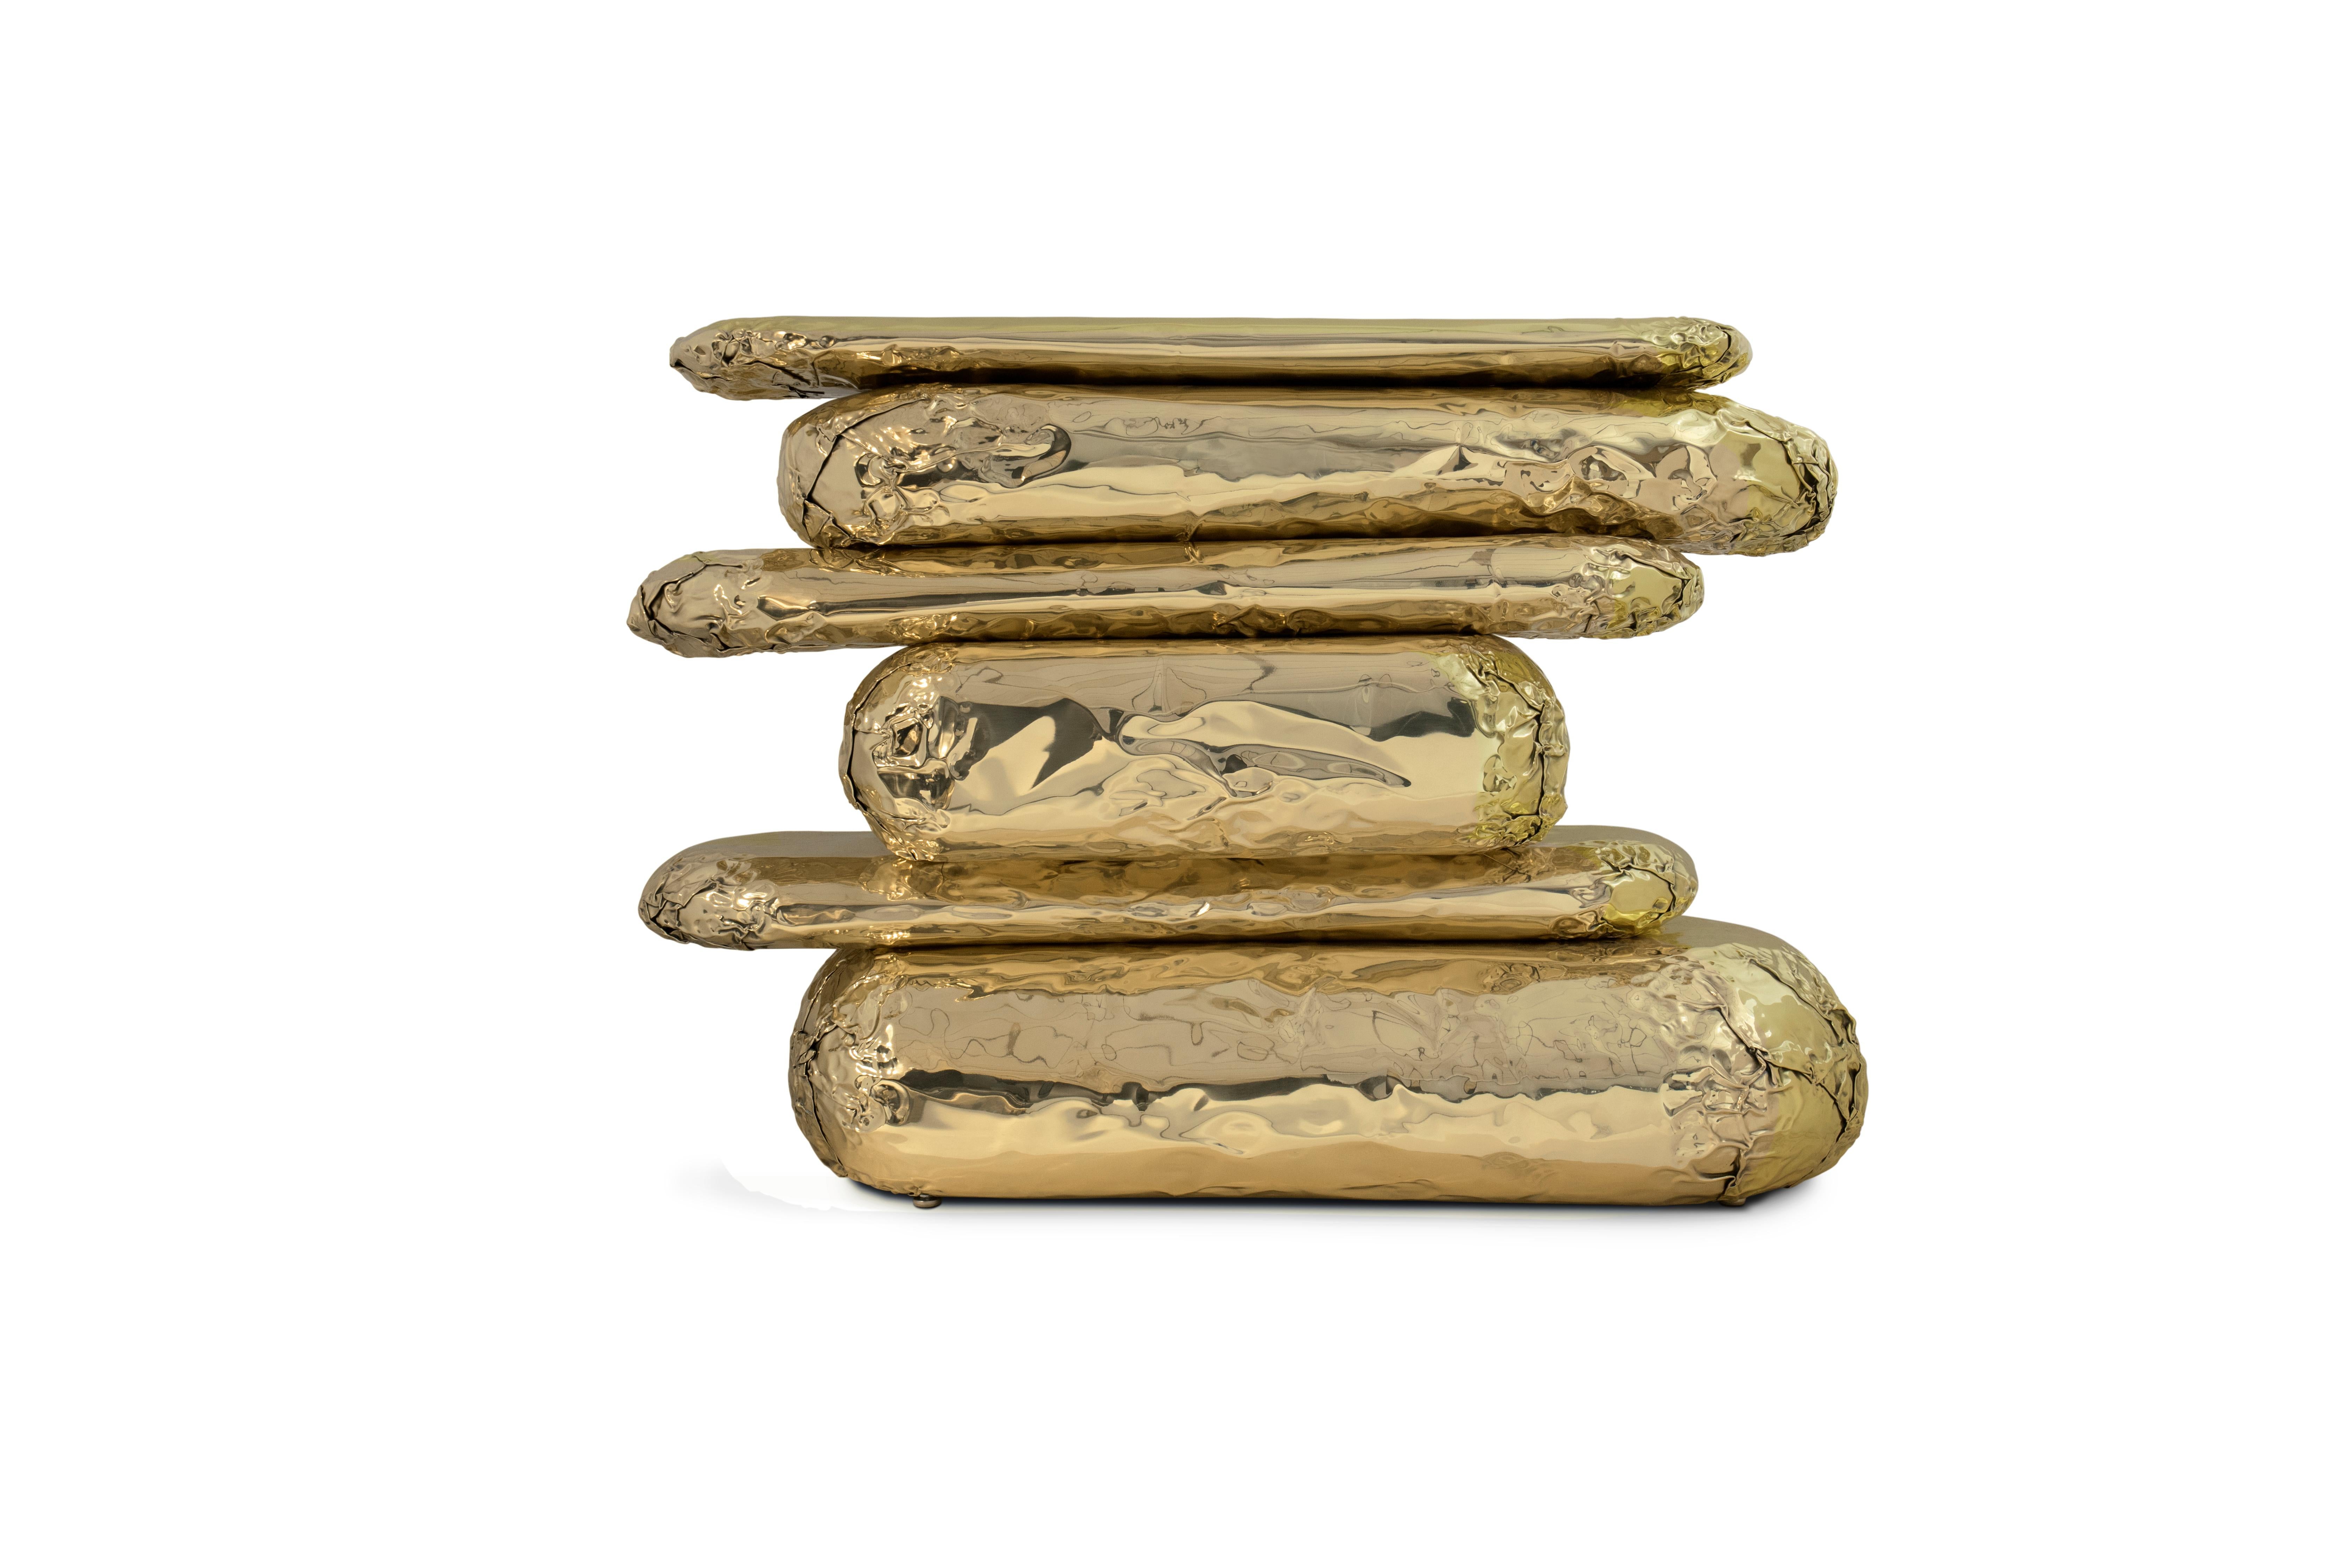 Finding inspiration in the prehistoric monument Stonehenge, positioned asymmetrically and composed by a striking finishes and materials brass and marble. This piece promises to elevate your living space to the next level. The metallic hues make an